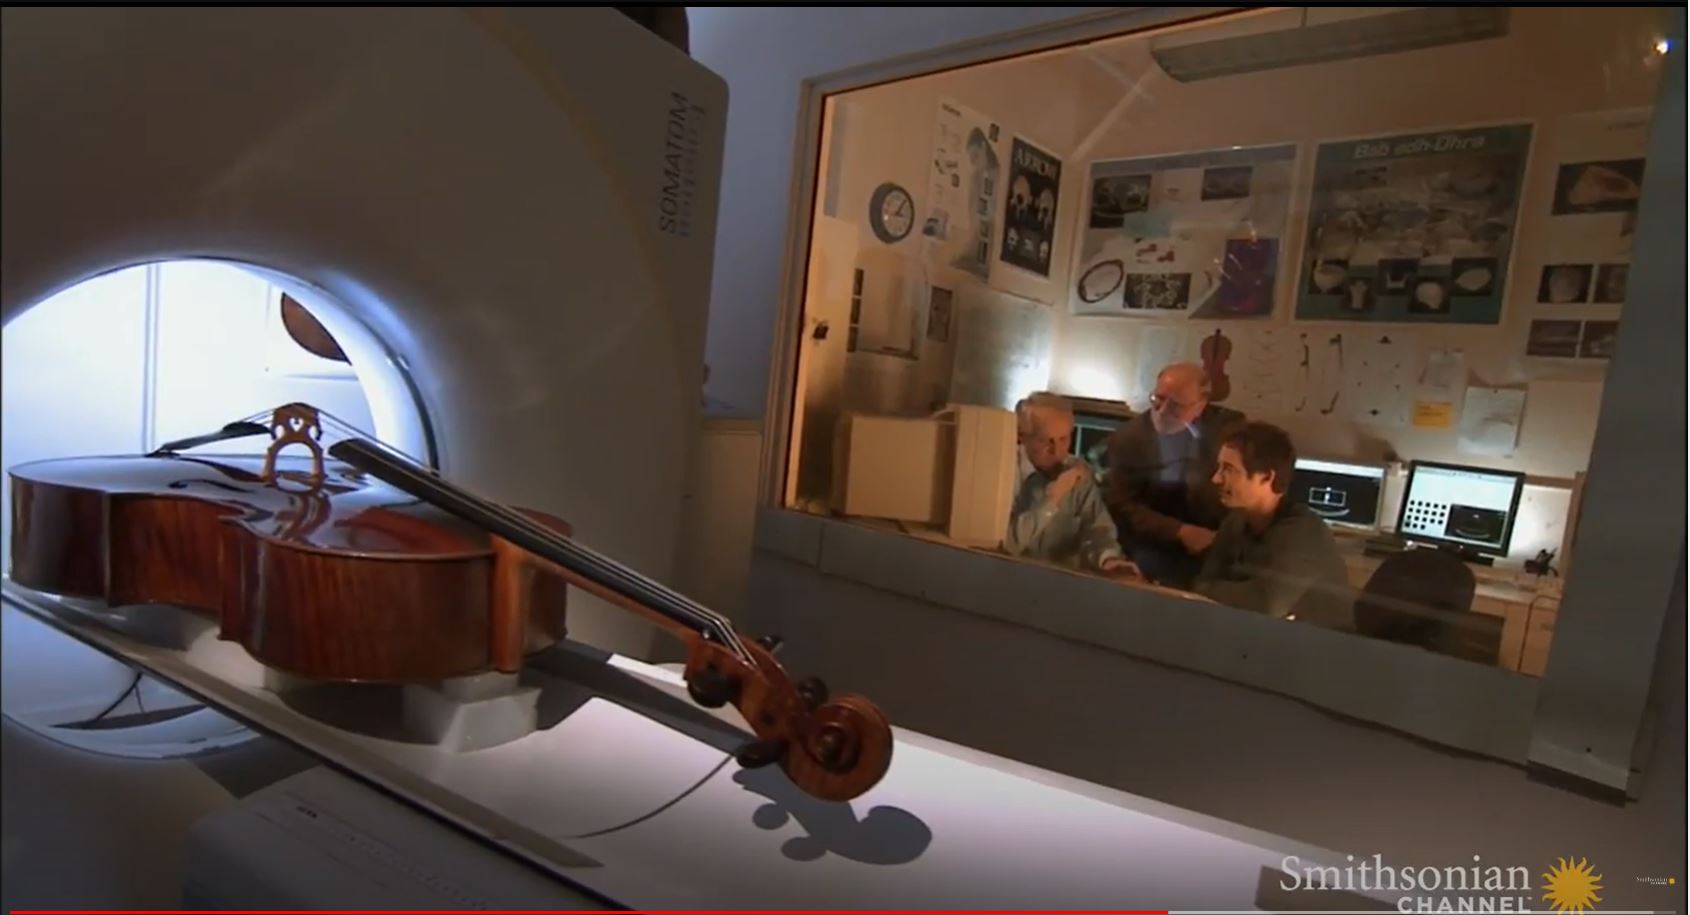 A YouTube video from the Smithsonian Channel that shows researchers using a CT Scanner to scan and measure the internal dimensions of string instruments. Host Tom Cavanagh observes the process of a delicate string instrument being placed in a CT Scanner. The researchers remark on how the data they collect is then provided to modern instrument manufacturers.